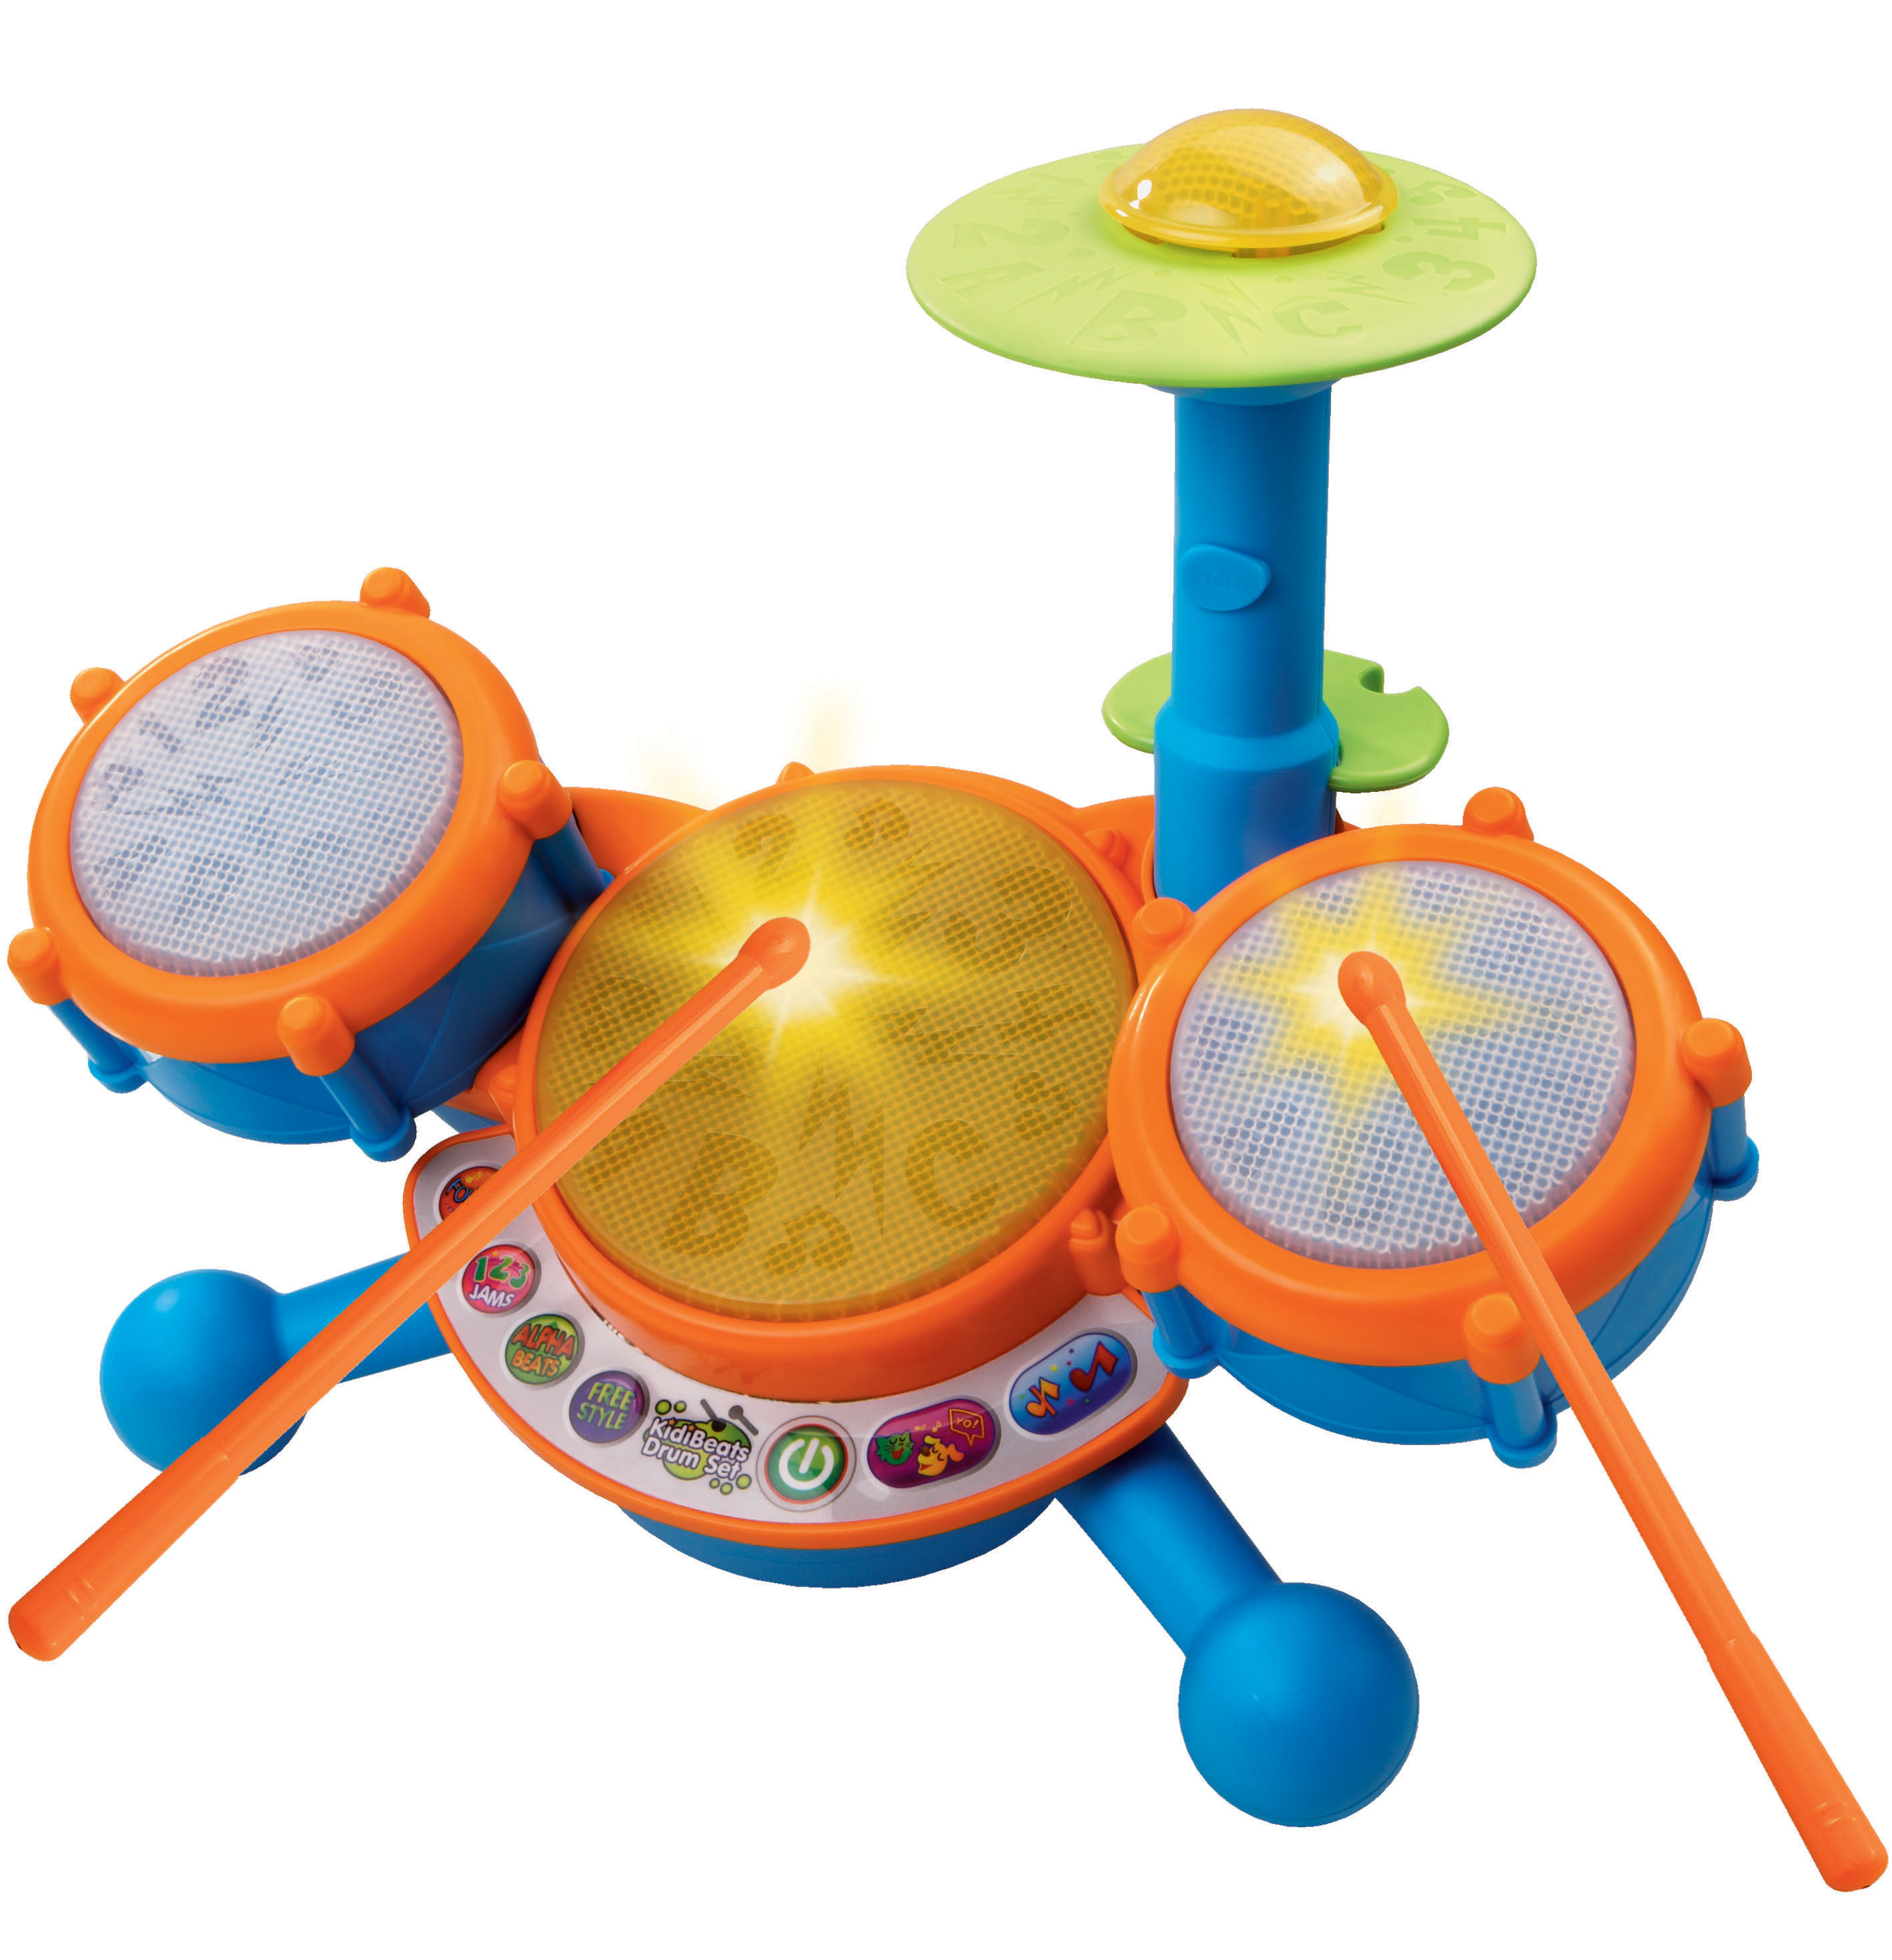 Vtech KidiBeats Drum Set Music Toy for Kids Ages 2+ - image 1 of 9